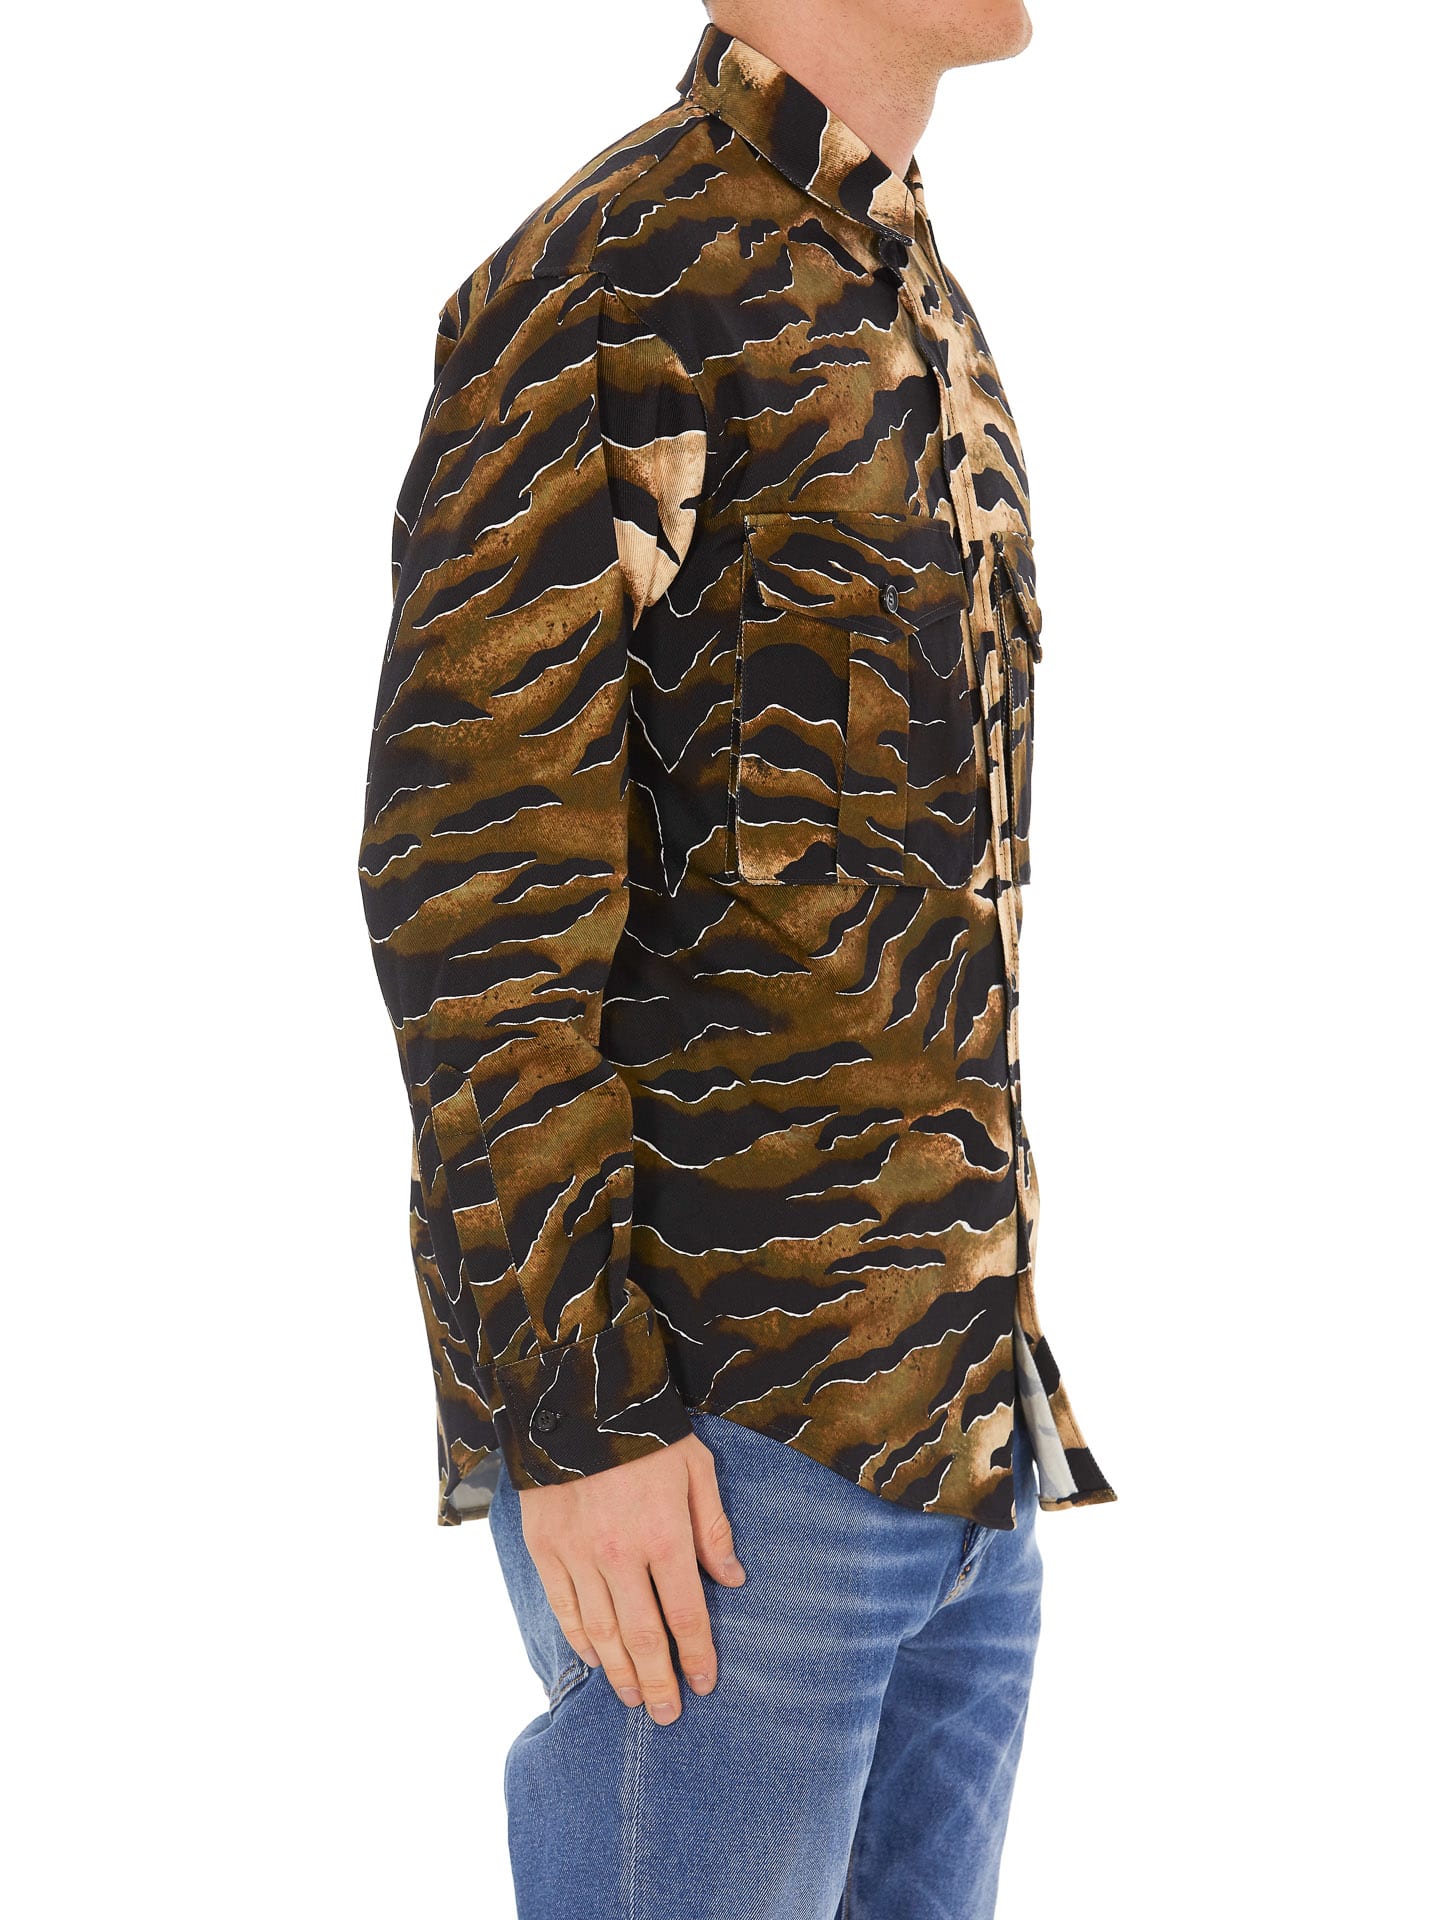 DSQUARED2 TIGER CAMOUFLAGE SHIRT,11220224